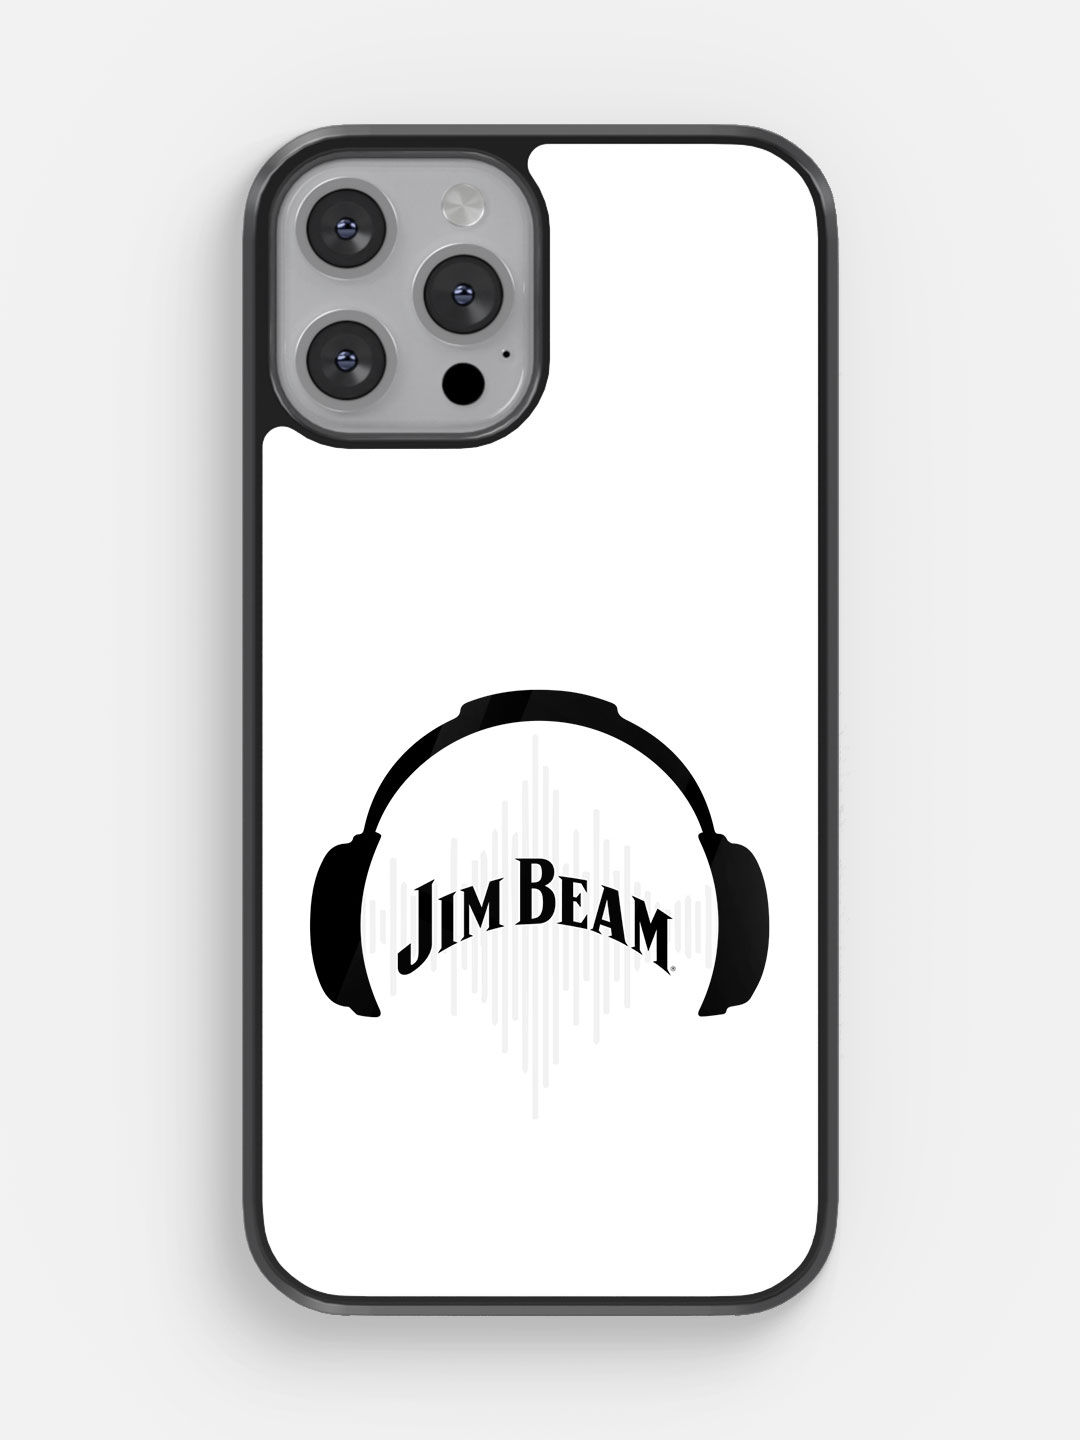 Jim Beam Solid Sound - Glass Case For iPhone 13 Pro Max